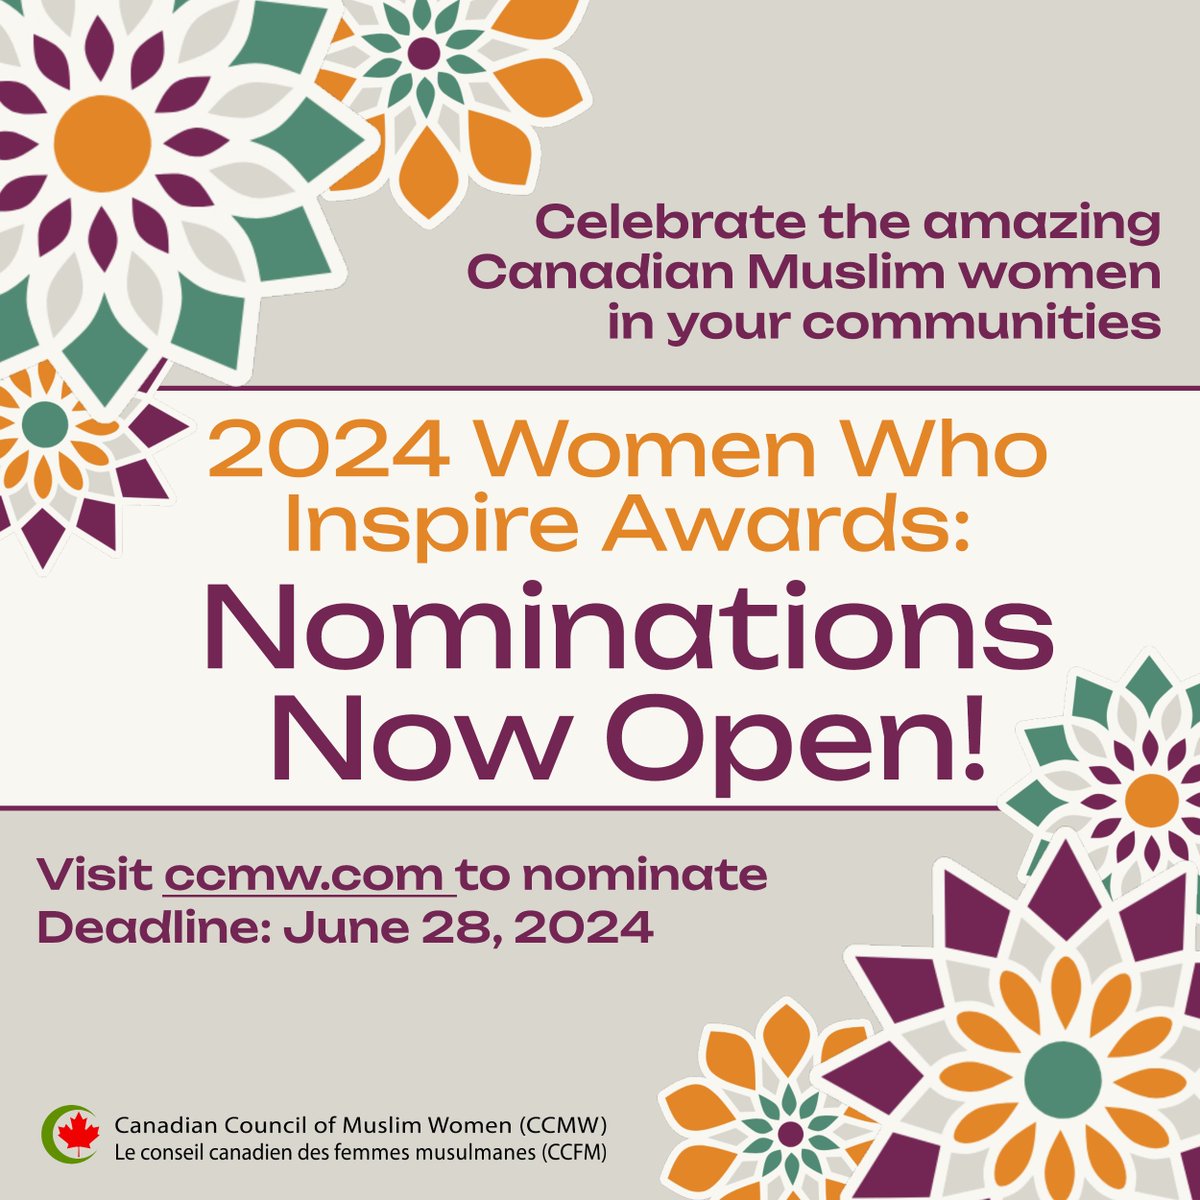 Nominations are now open for the 2024 Women Who Inspire Awards! Celebrate the amazing Canadian Muslim women in your communities. Submit your nomination by June 28th here: form.jotform.com/241084715368258 #wwi2024 #canadian #muslimwomen #awards